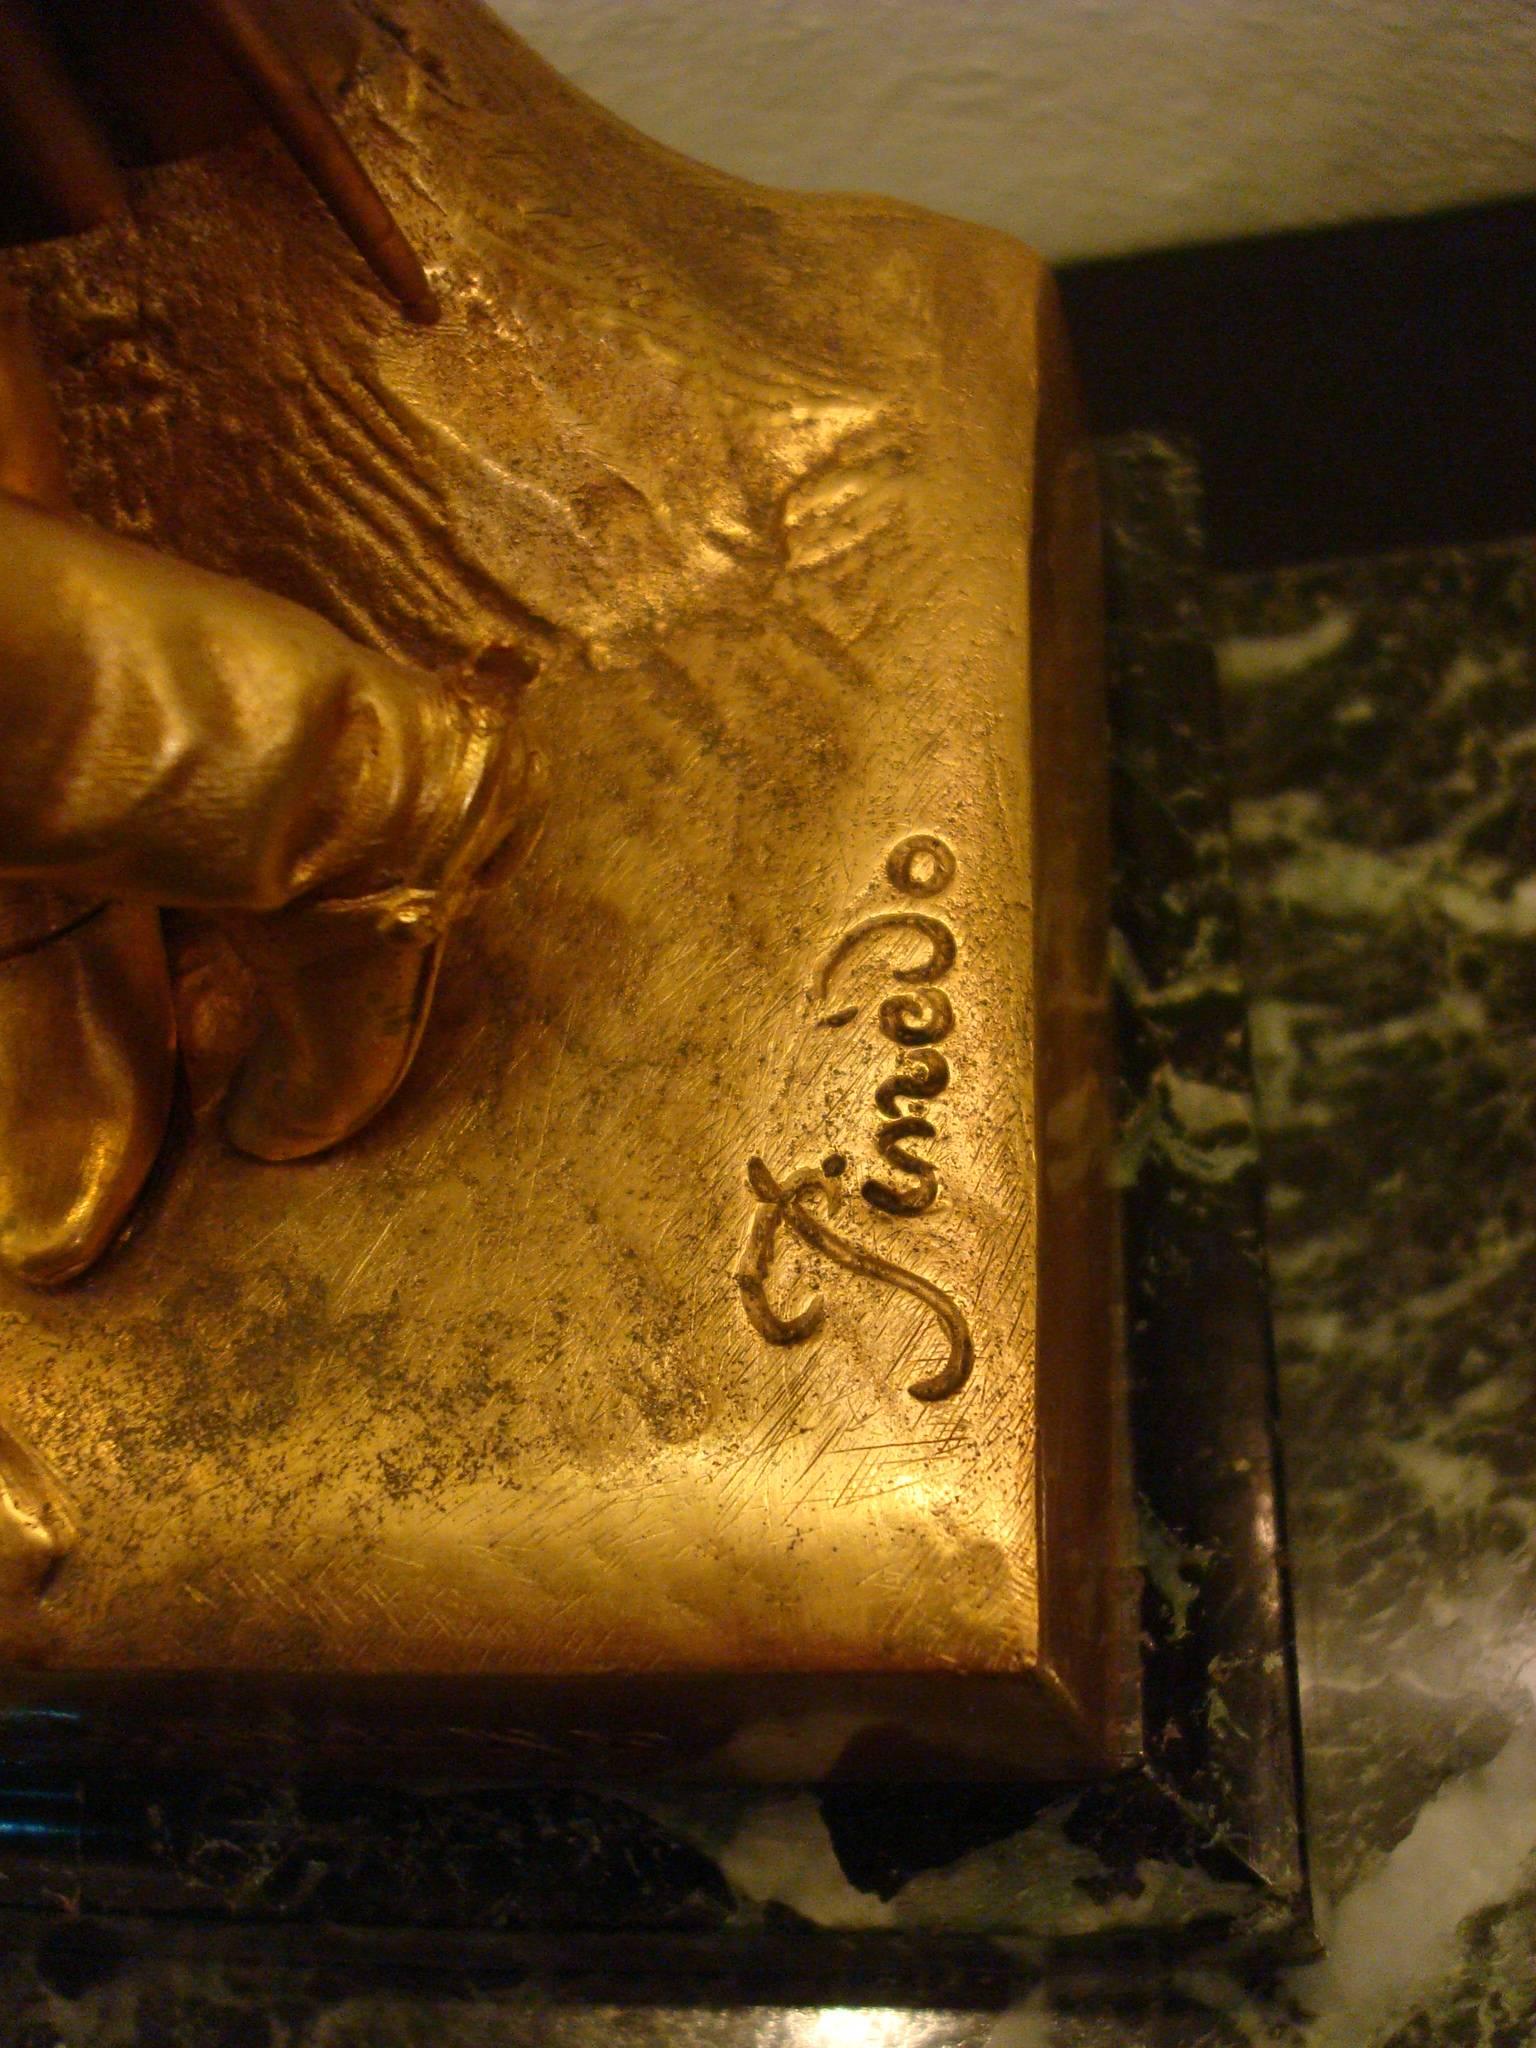 Napoleon Bonaparte bronze desk inkwell, signed Pinedo with foundry mark. Mounted over a Green Alps marble.

Antique signed 19th large bronze gold overlay Napoleon ink well.